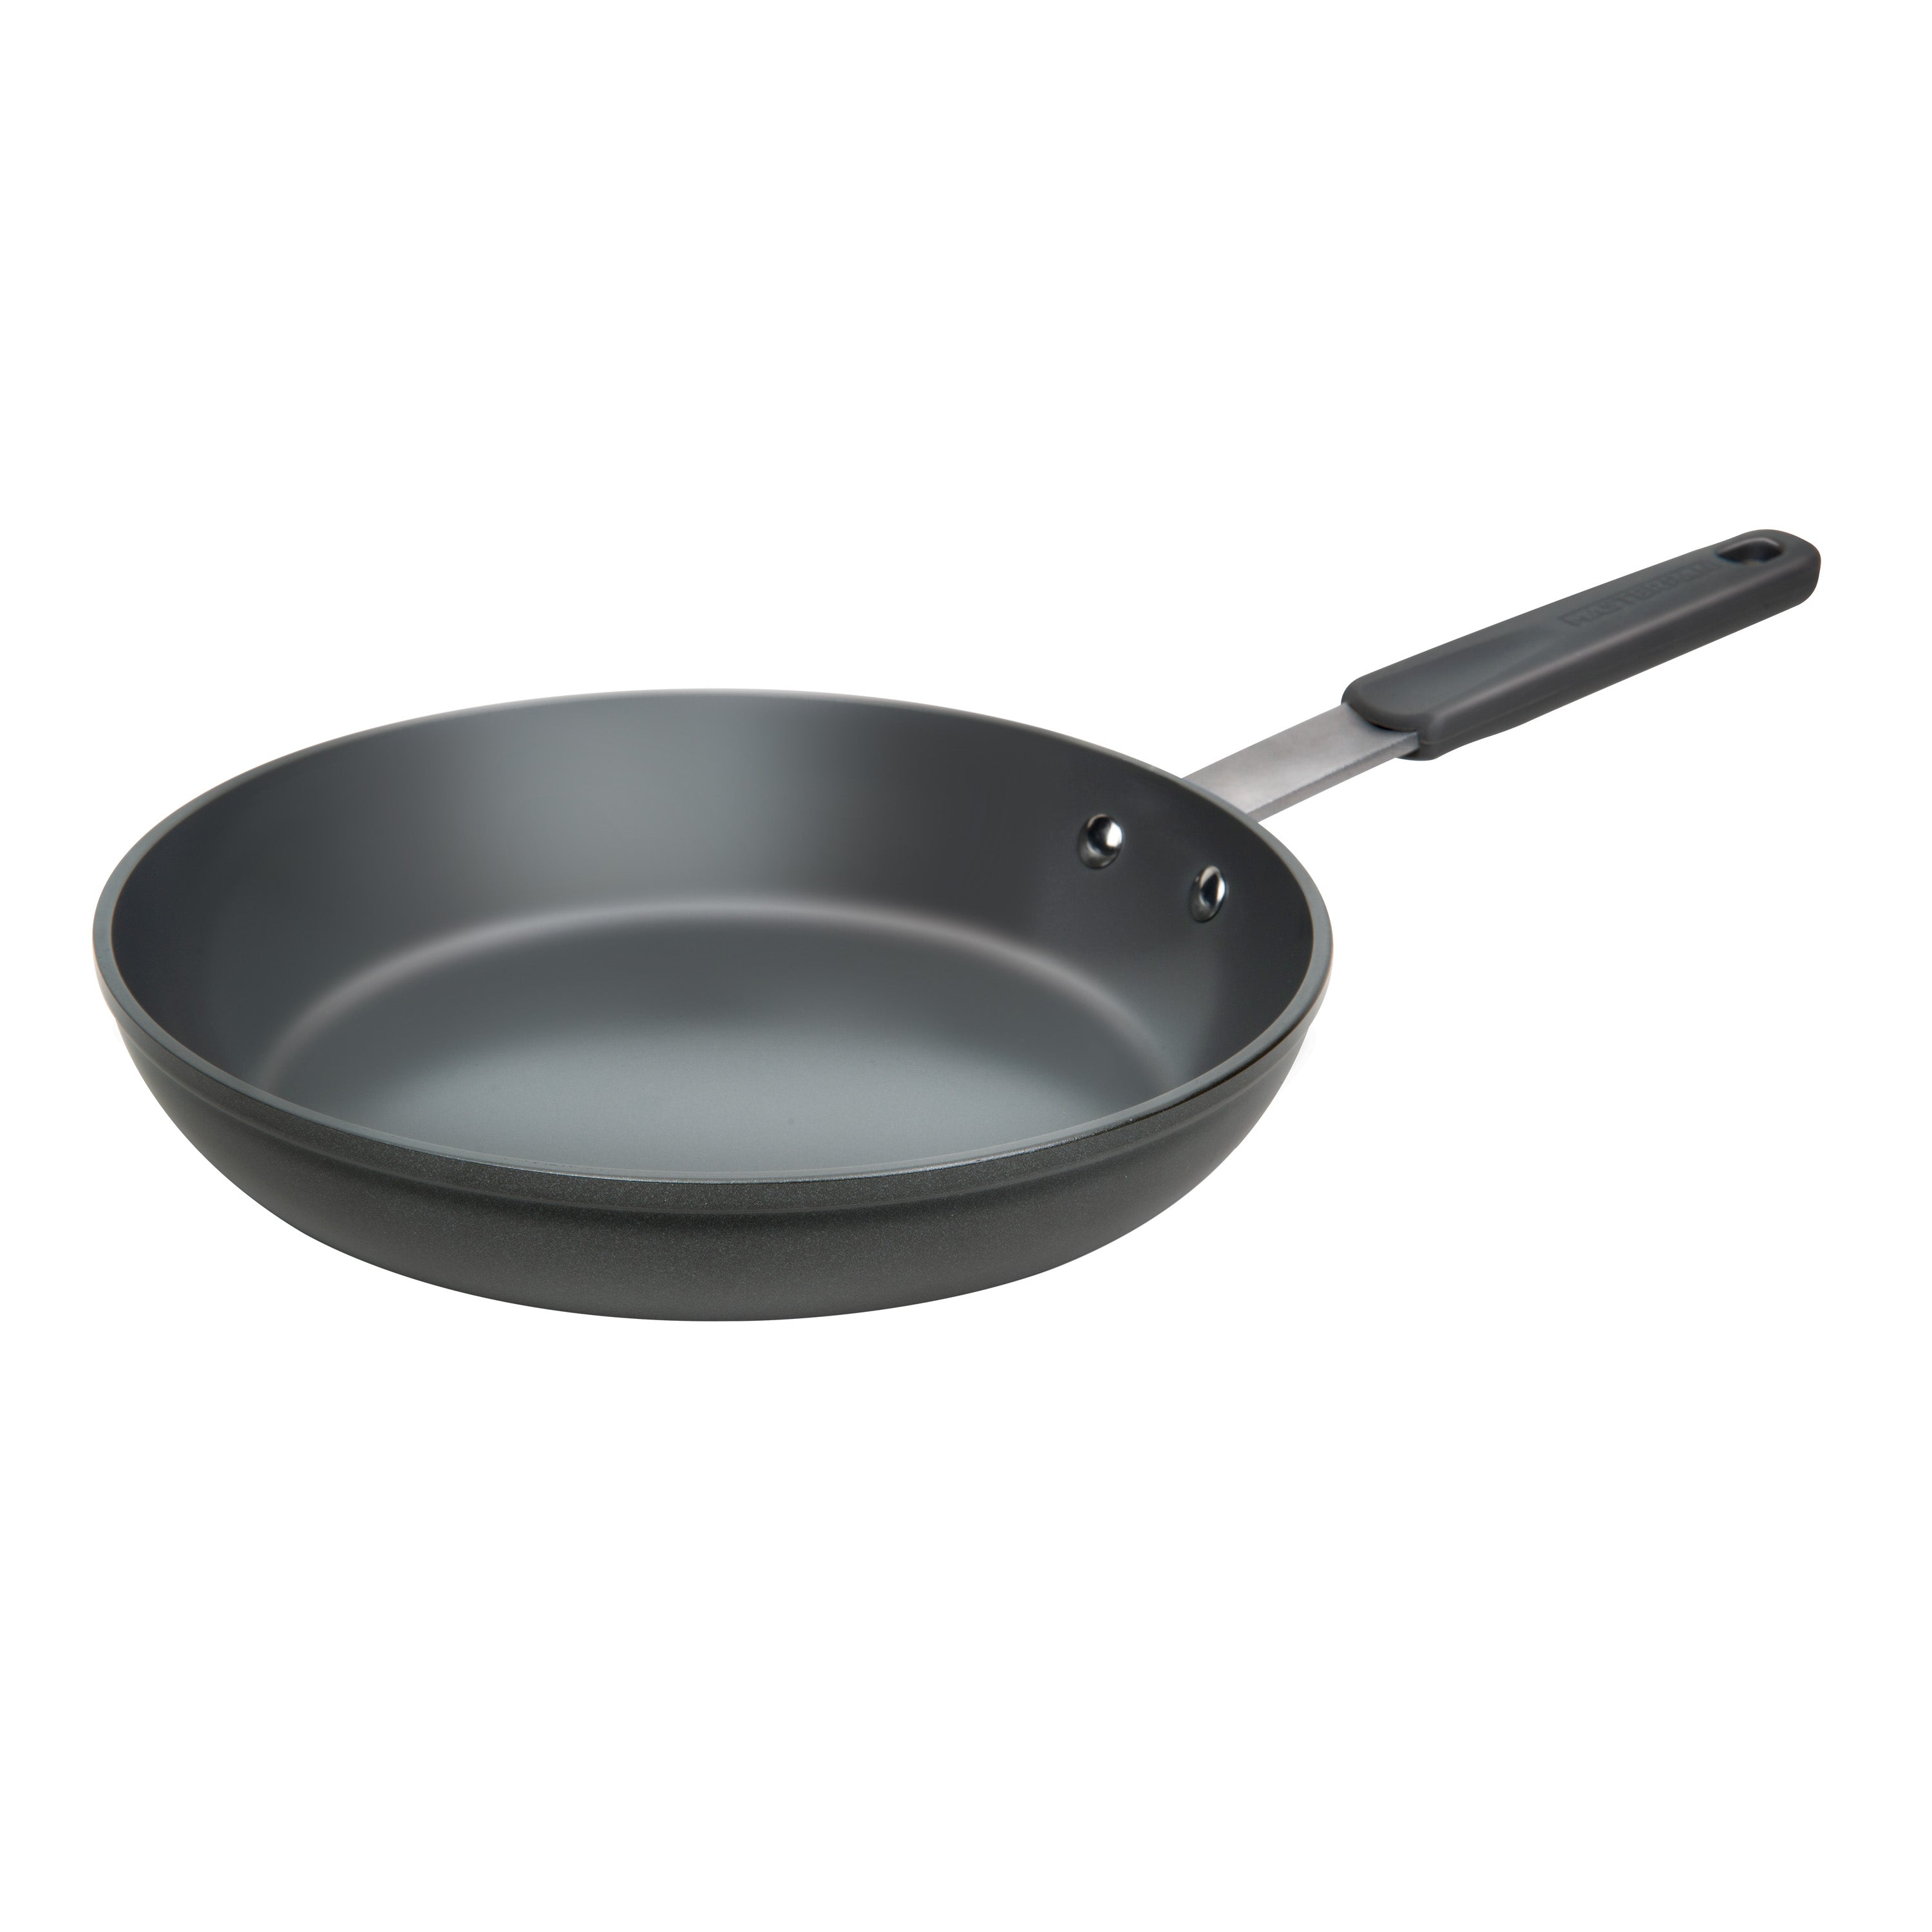 MasterPan 11 in. Healthy Ceramic Non-Stick Aluminium Cookware Fry Pan & Skillet with Stainless Steel Chefs Handle